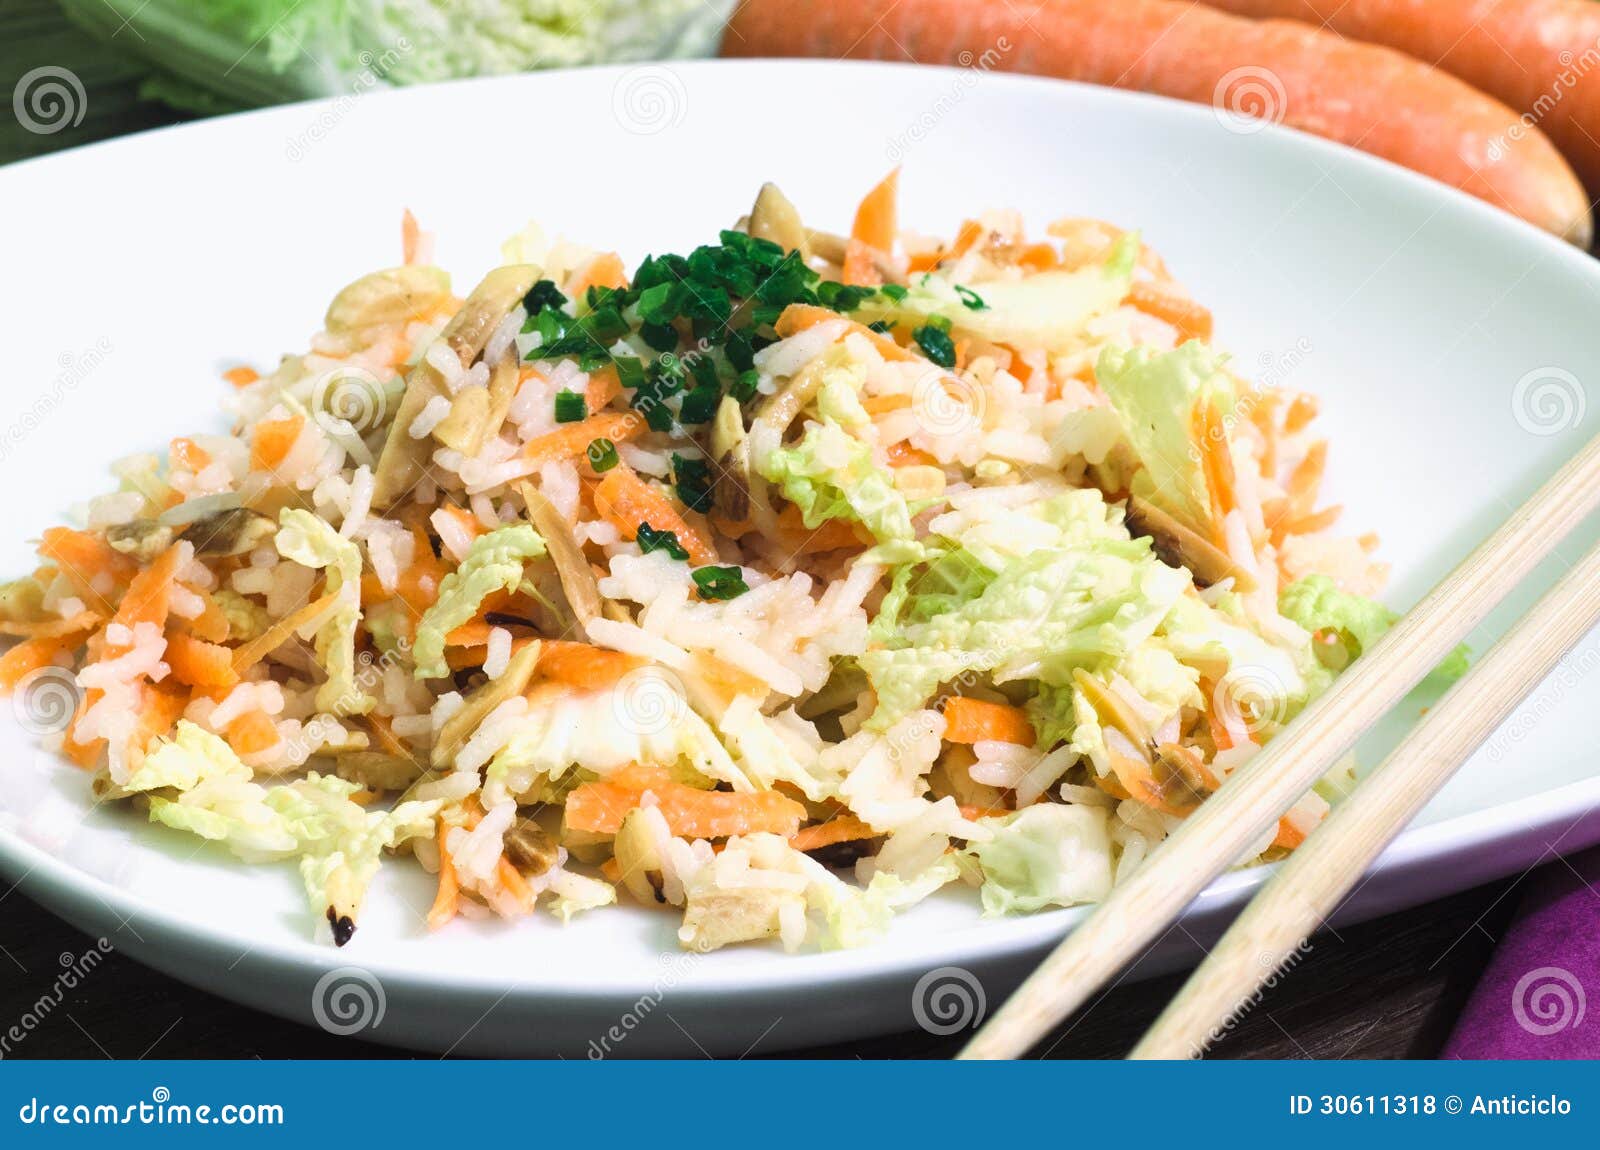 Oriental rice salad. Close view of a dish of rice salad with chinese cabbage, rice and roasted almonds